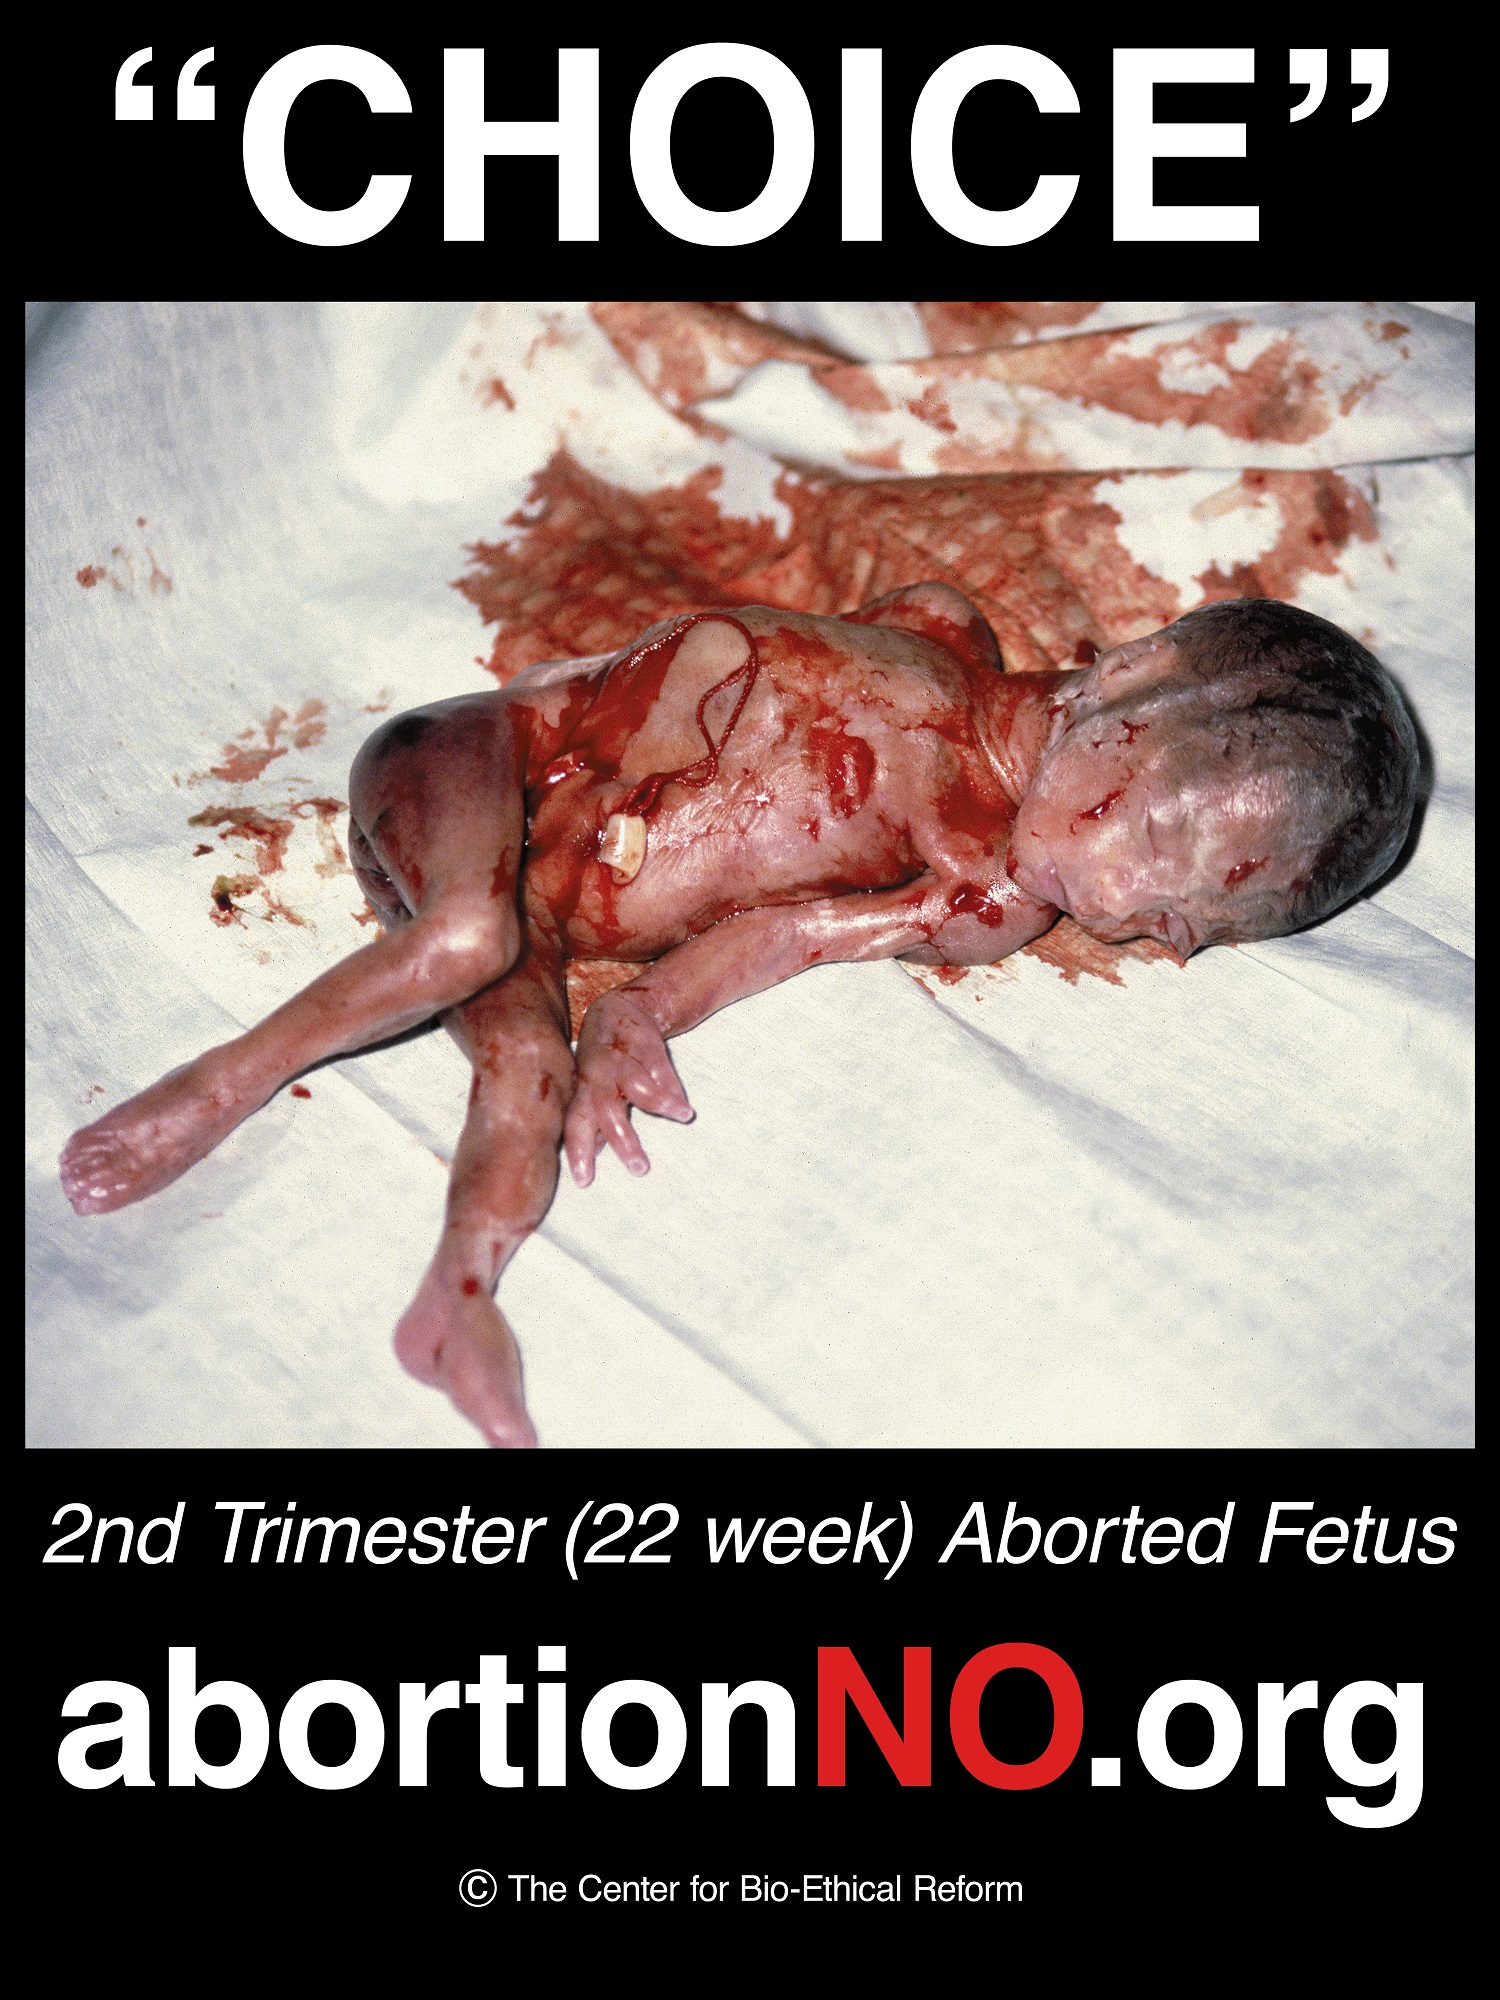 Aborted 22 week baby